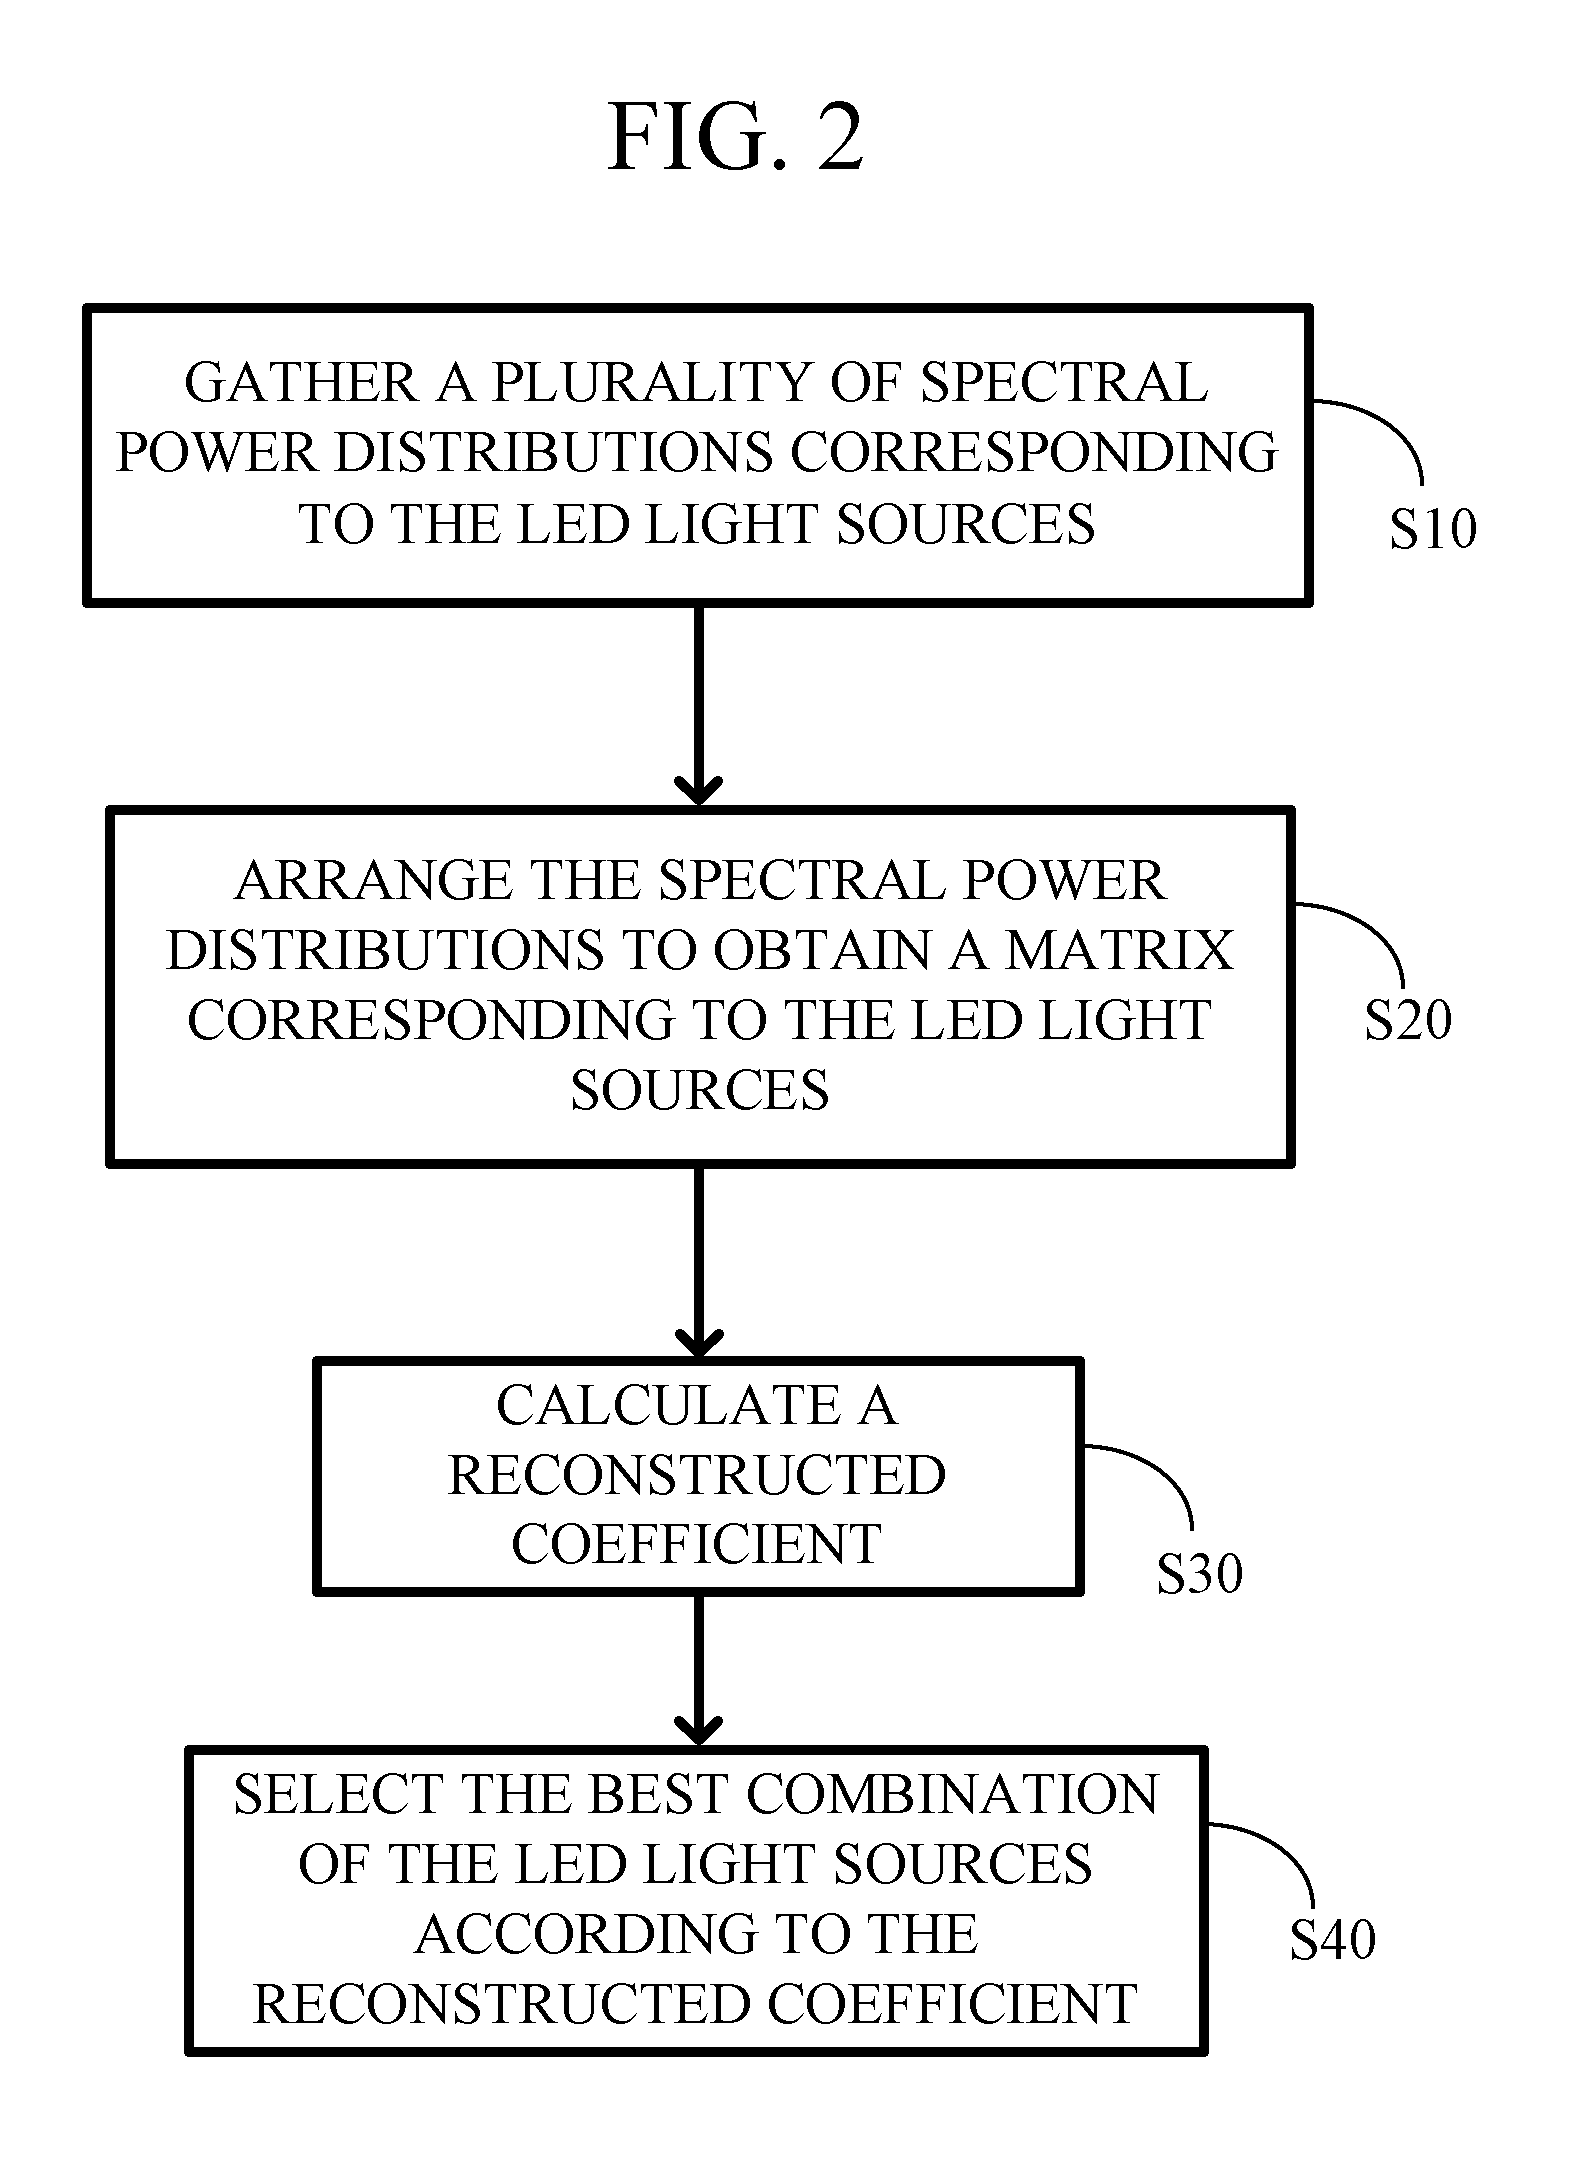 Method for optimal selecting LED light sources and implementing full spectrum light